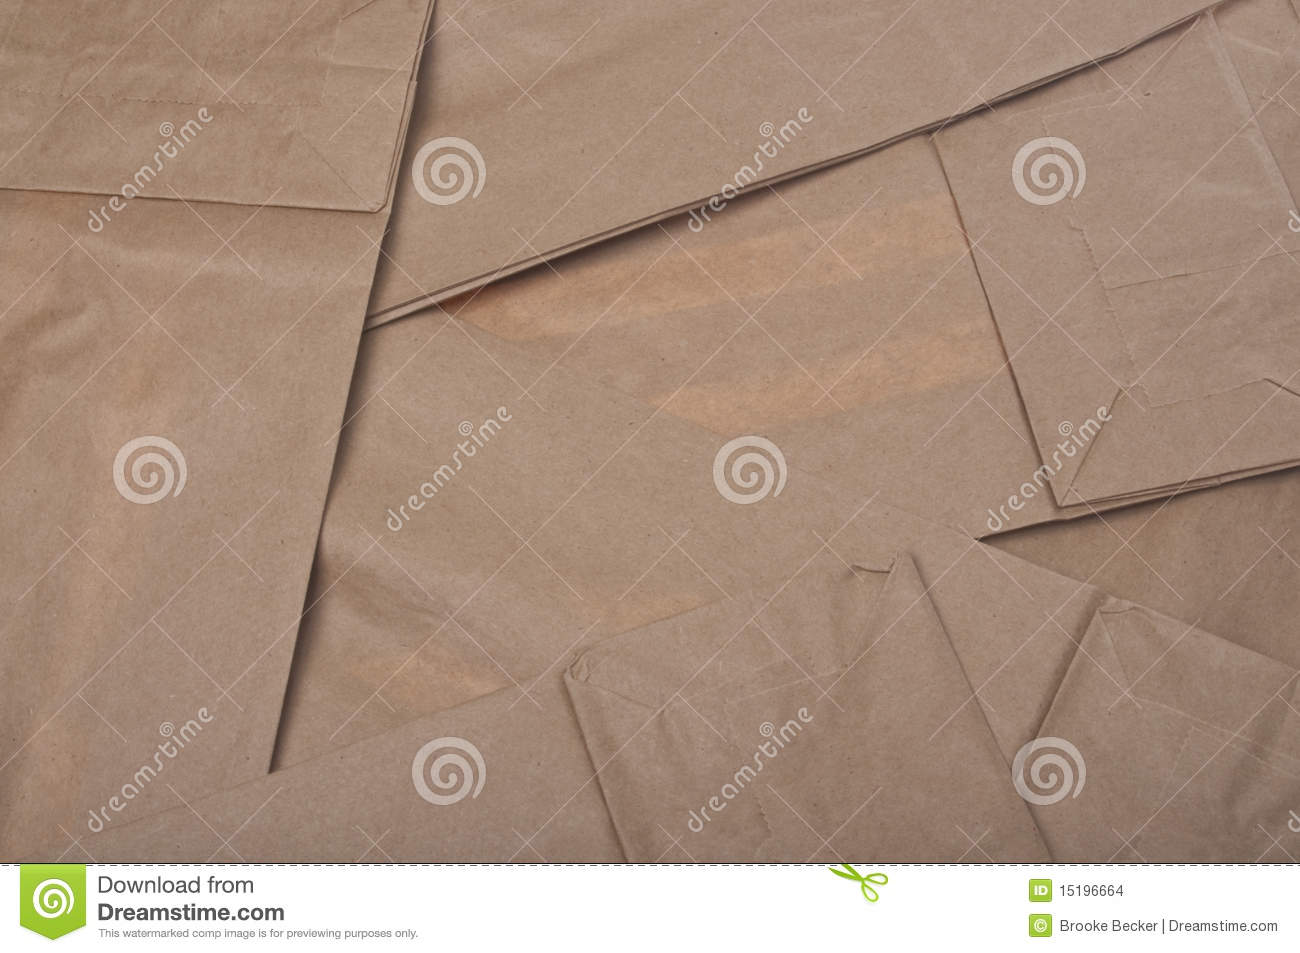 Brown Paper Bag Background Stock Images   Image  15196664